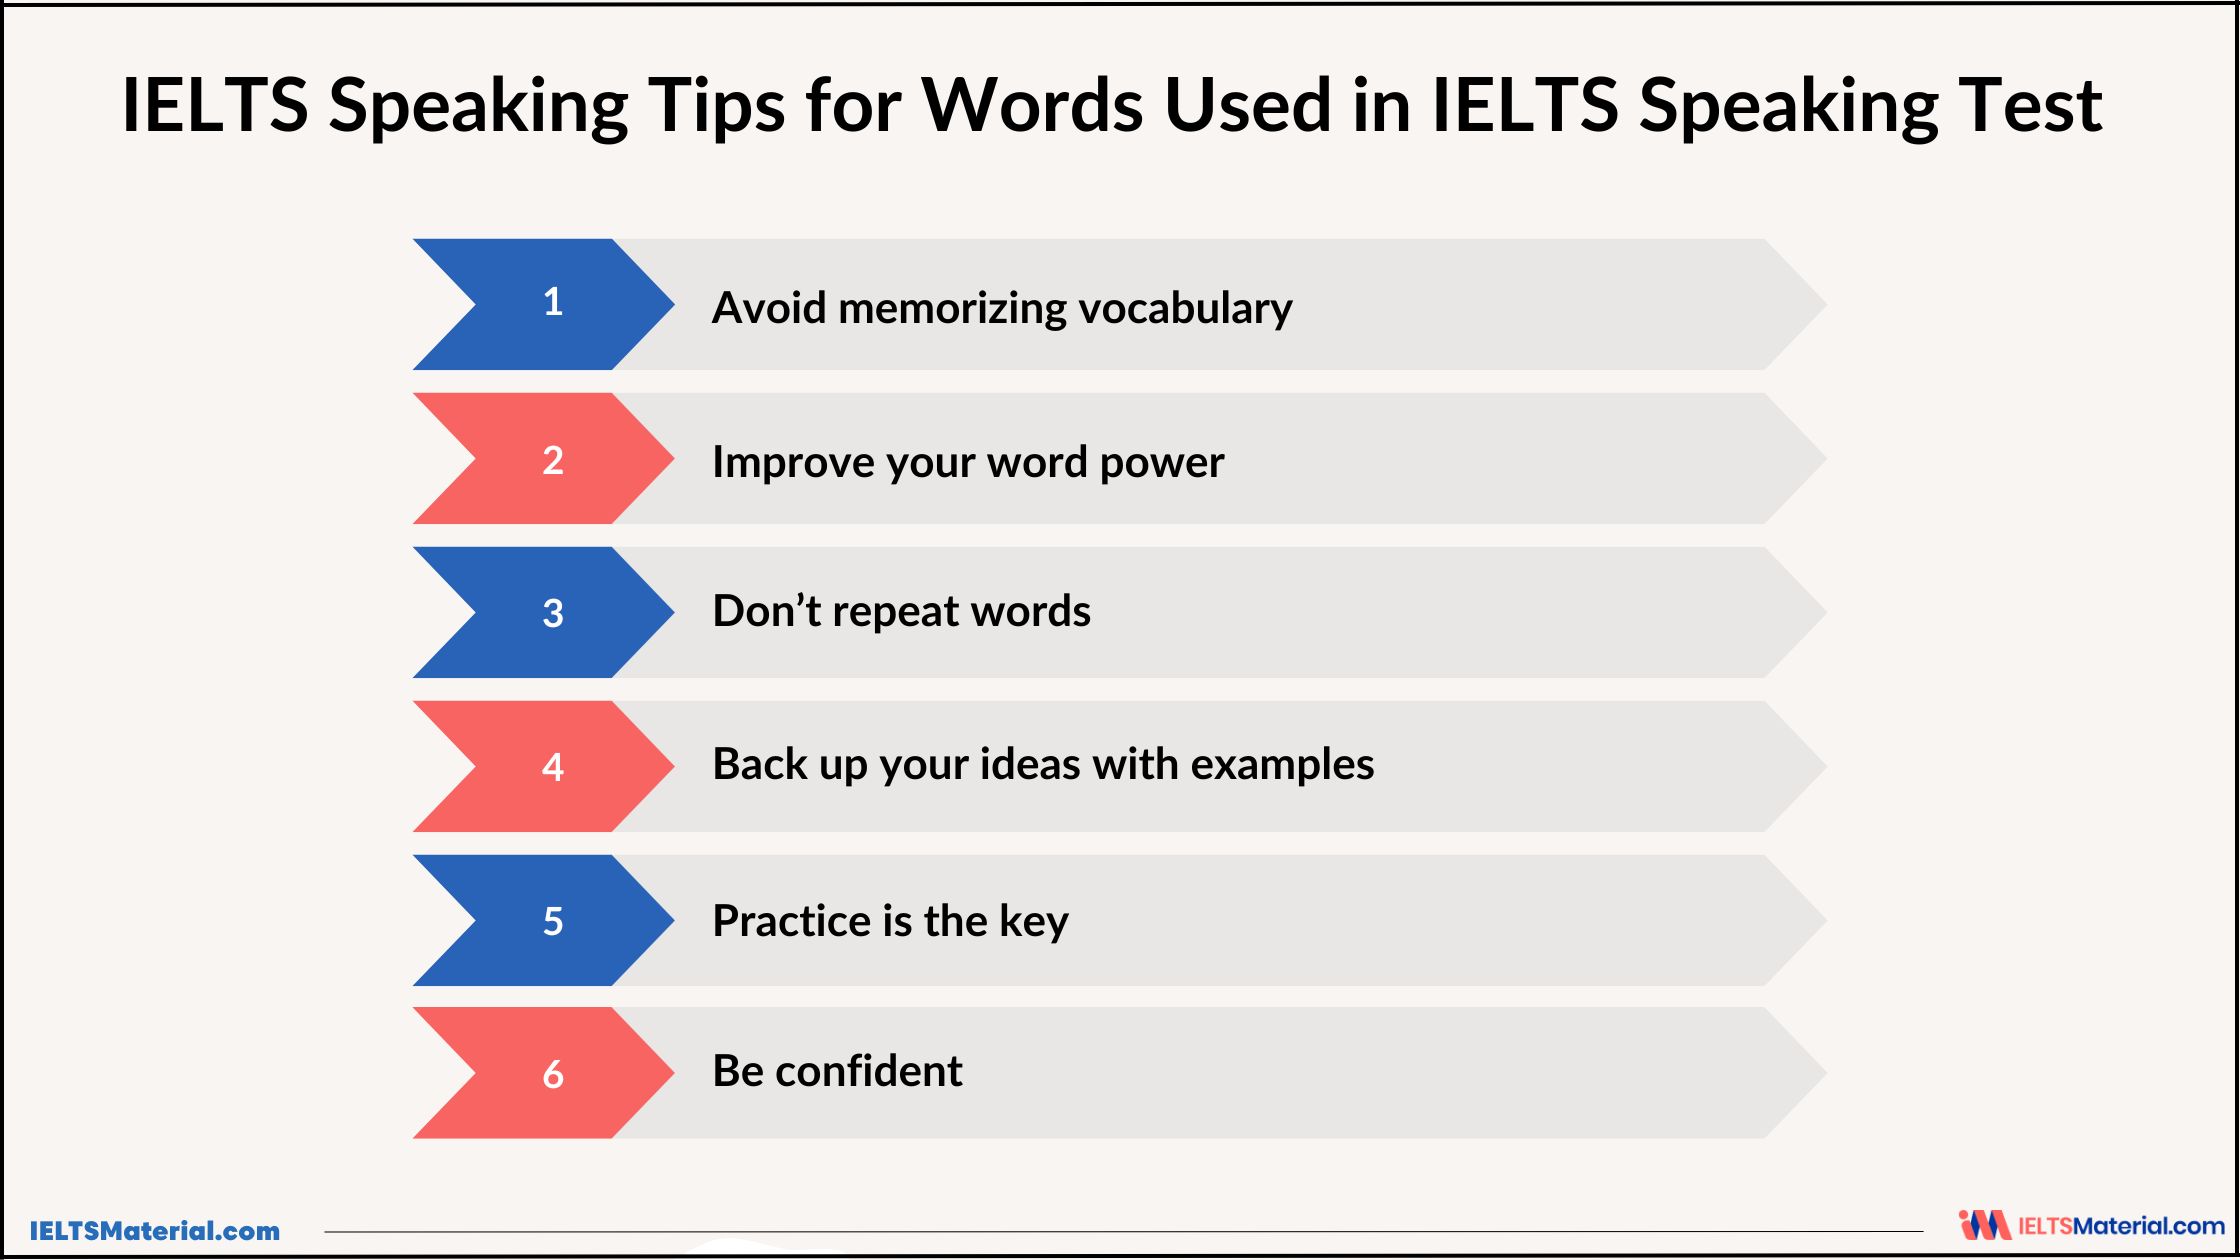 Tips for Words Used in IELTS Speaking Test